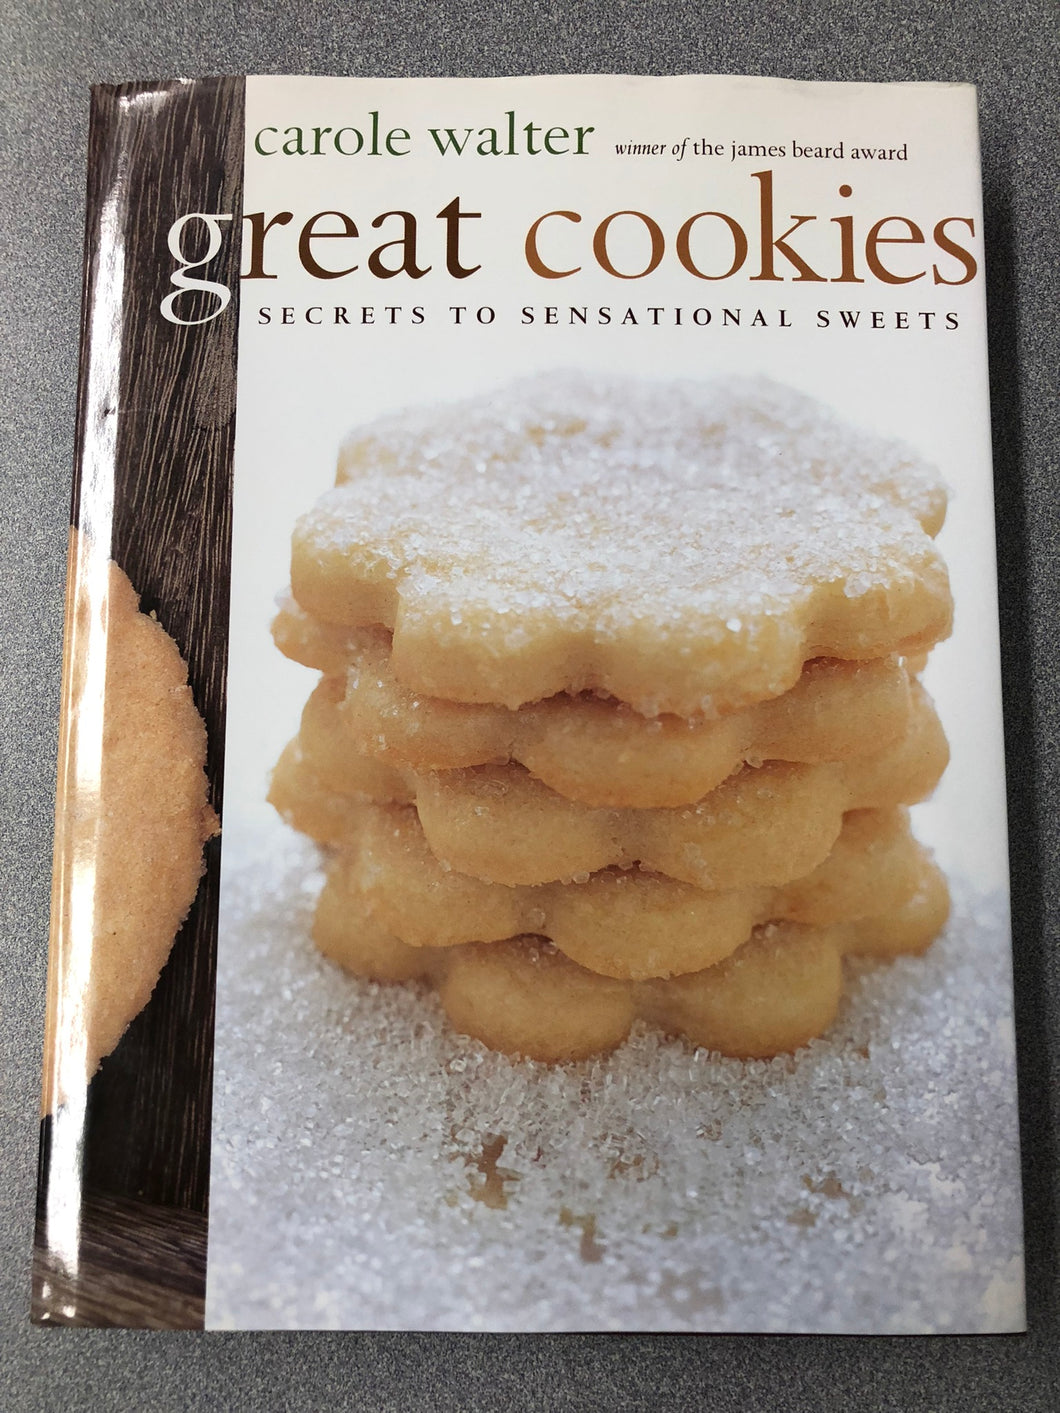 Great Cookies: Secrets to Sensational Sweets, Walter, Carole [2003] CO 9/22